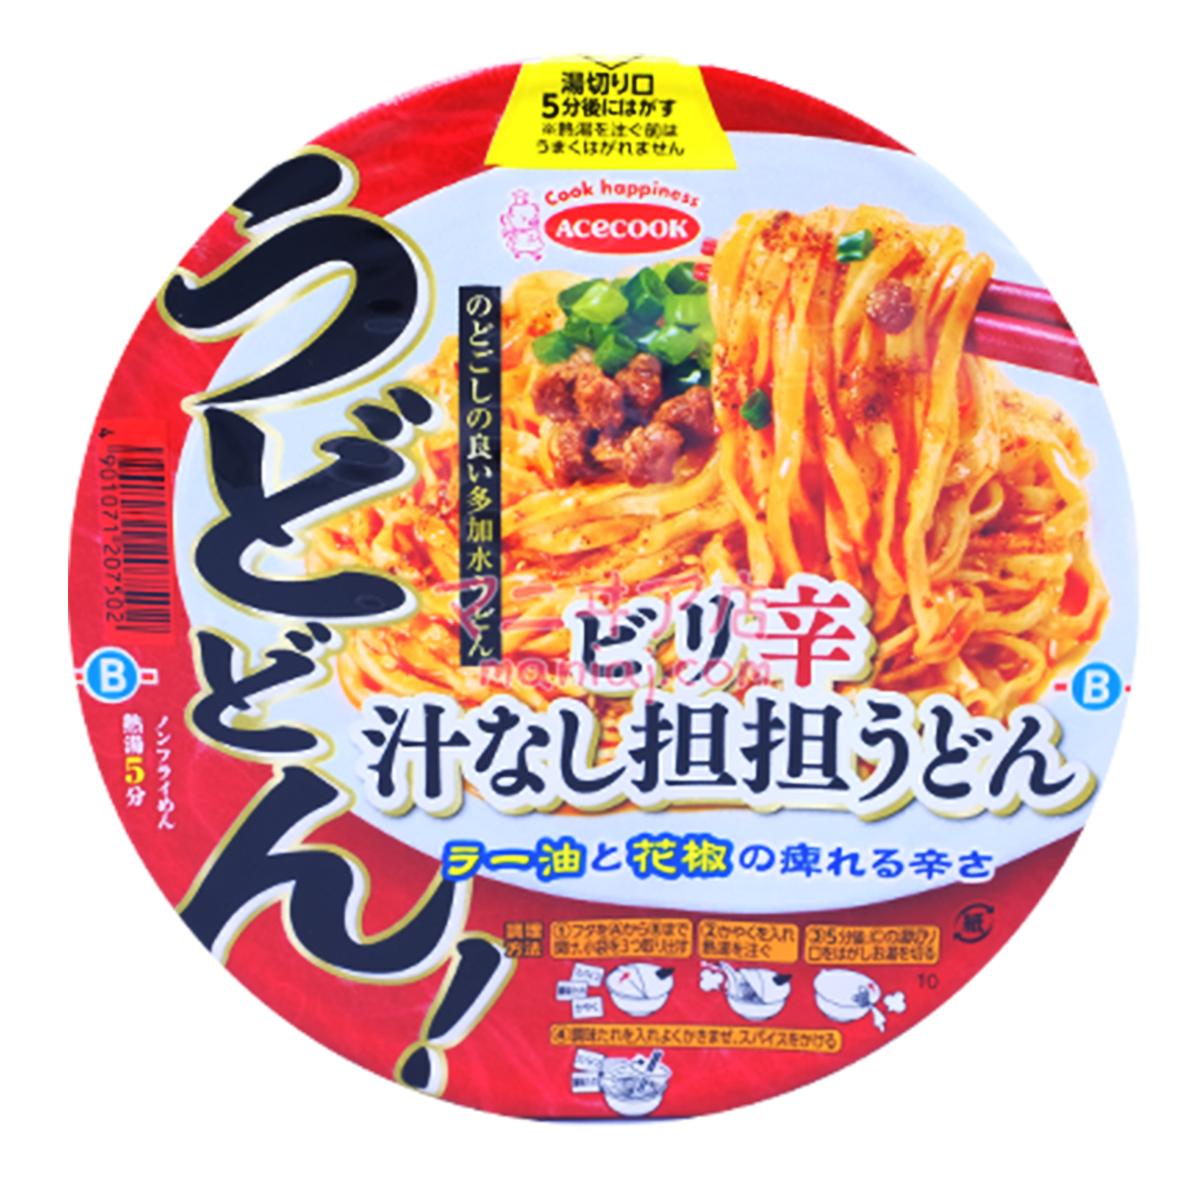 Spicy Tandan Udon without Soup